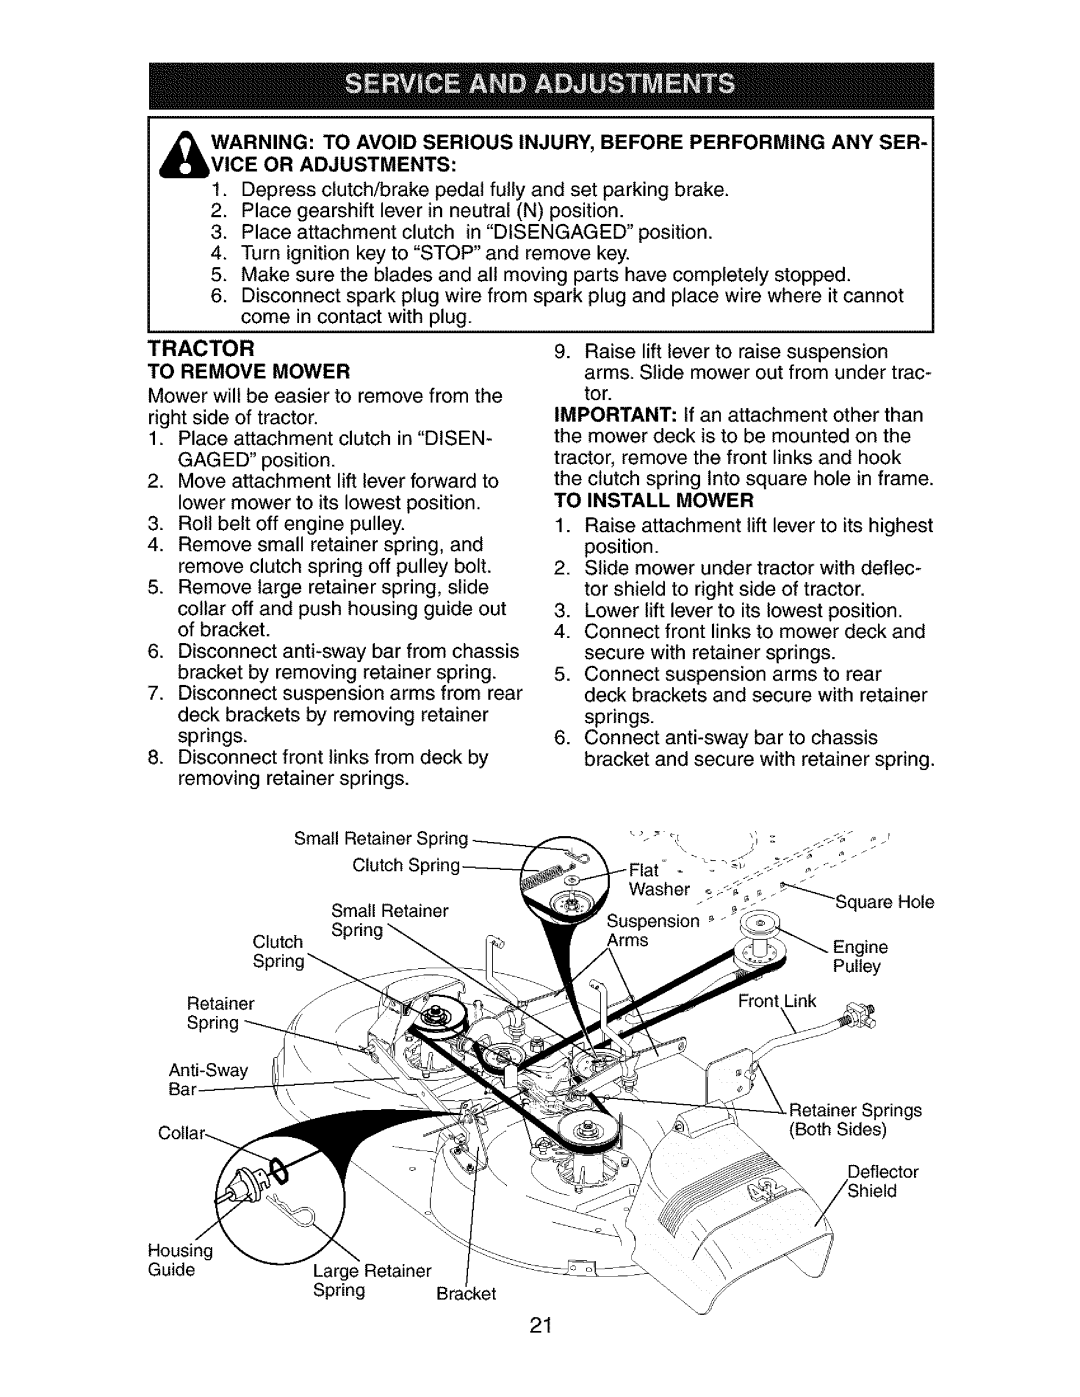 Craftsman 917.273134 owner manual Tractor To Remove Mower, To Install Mower 